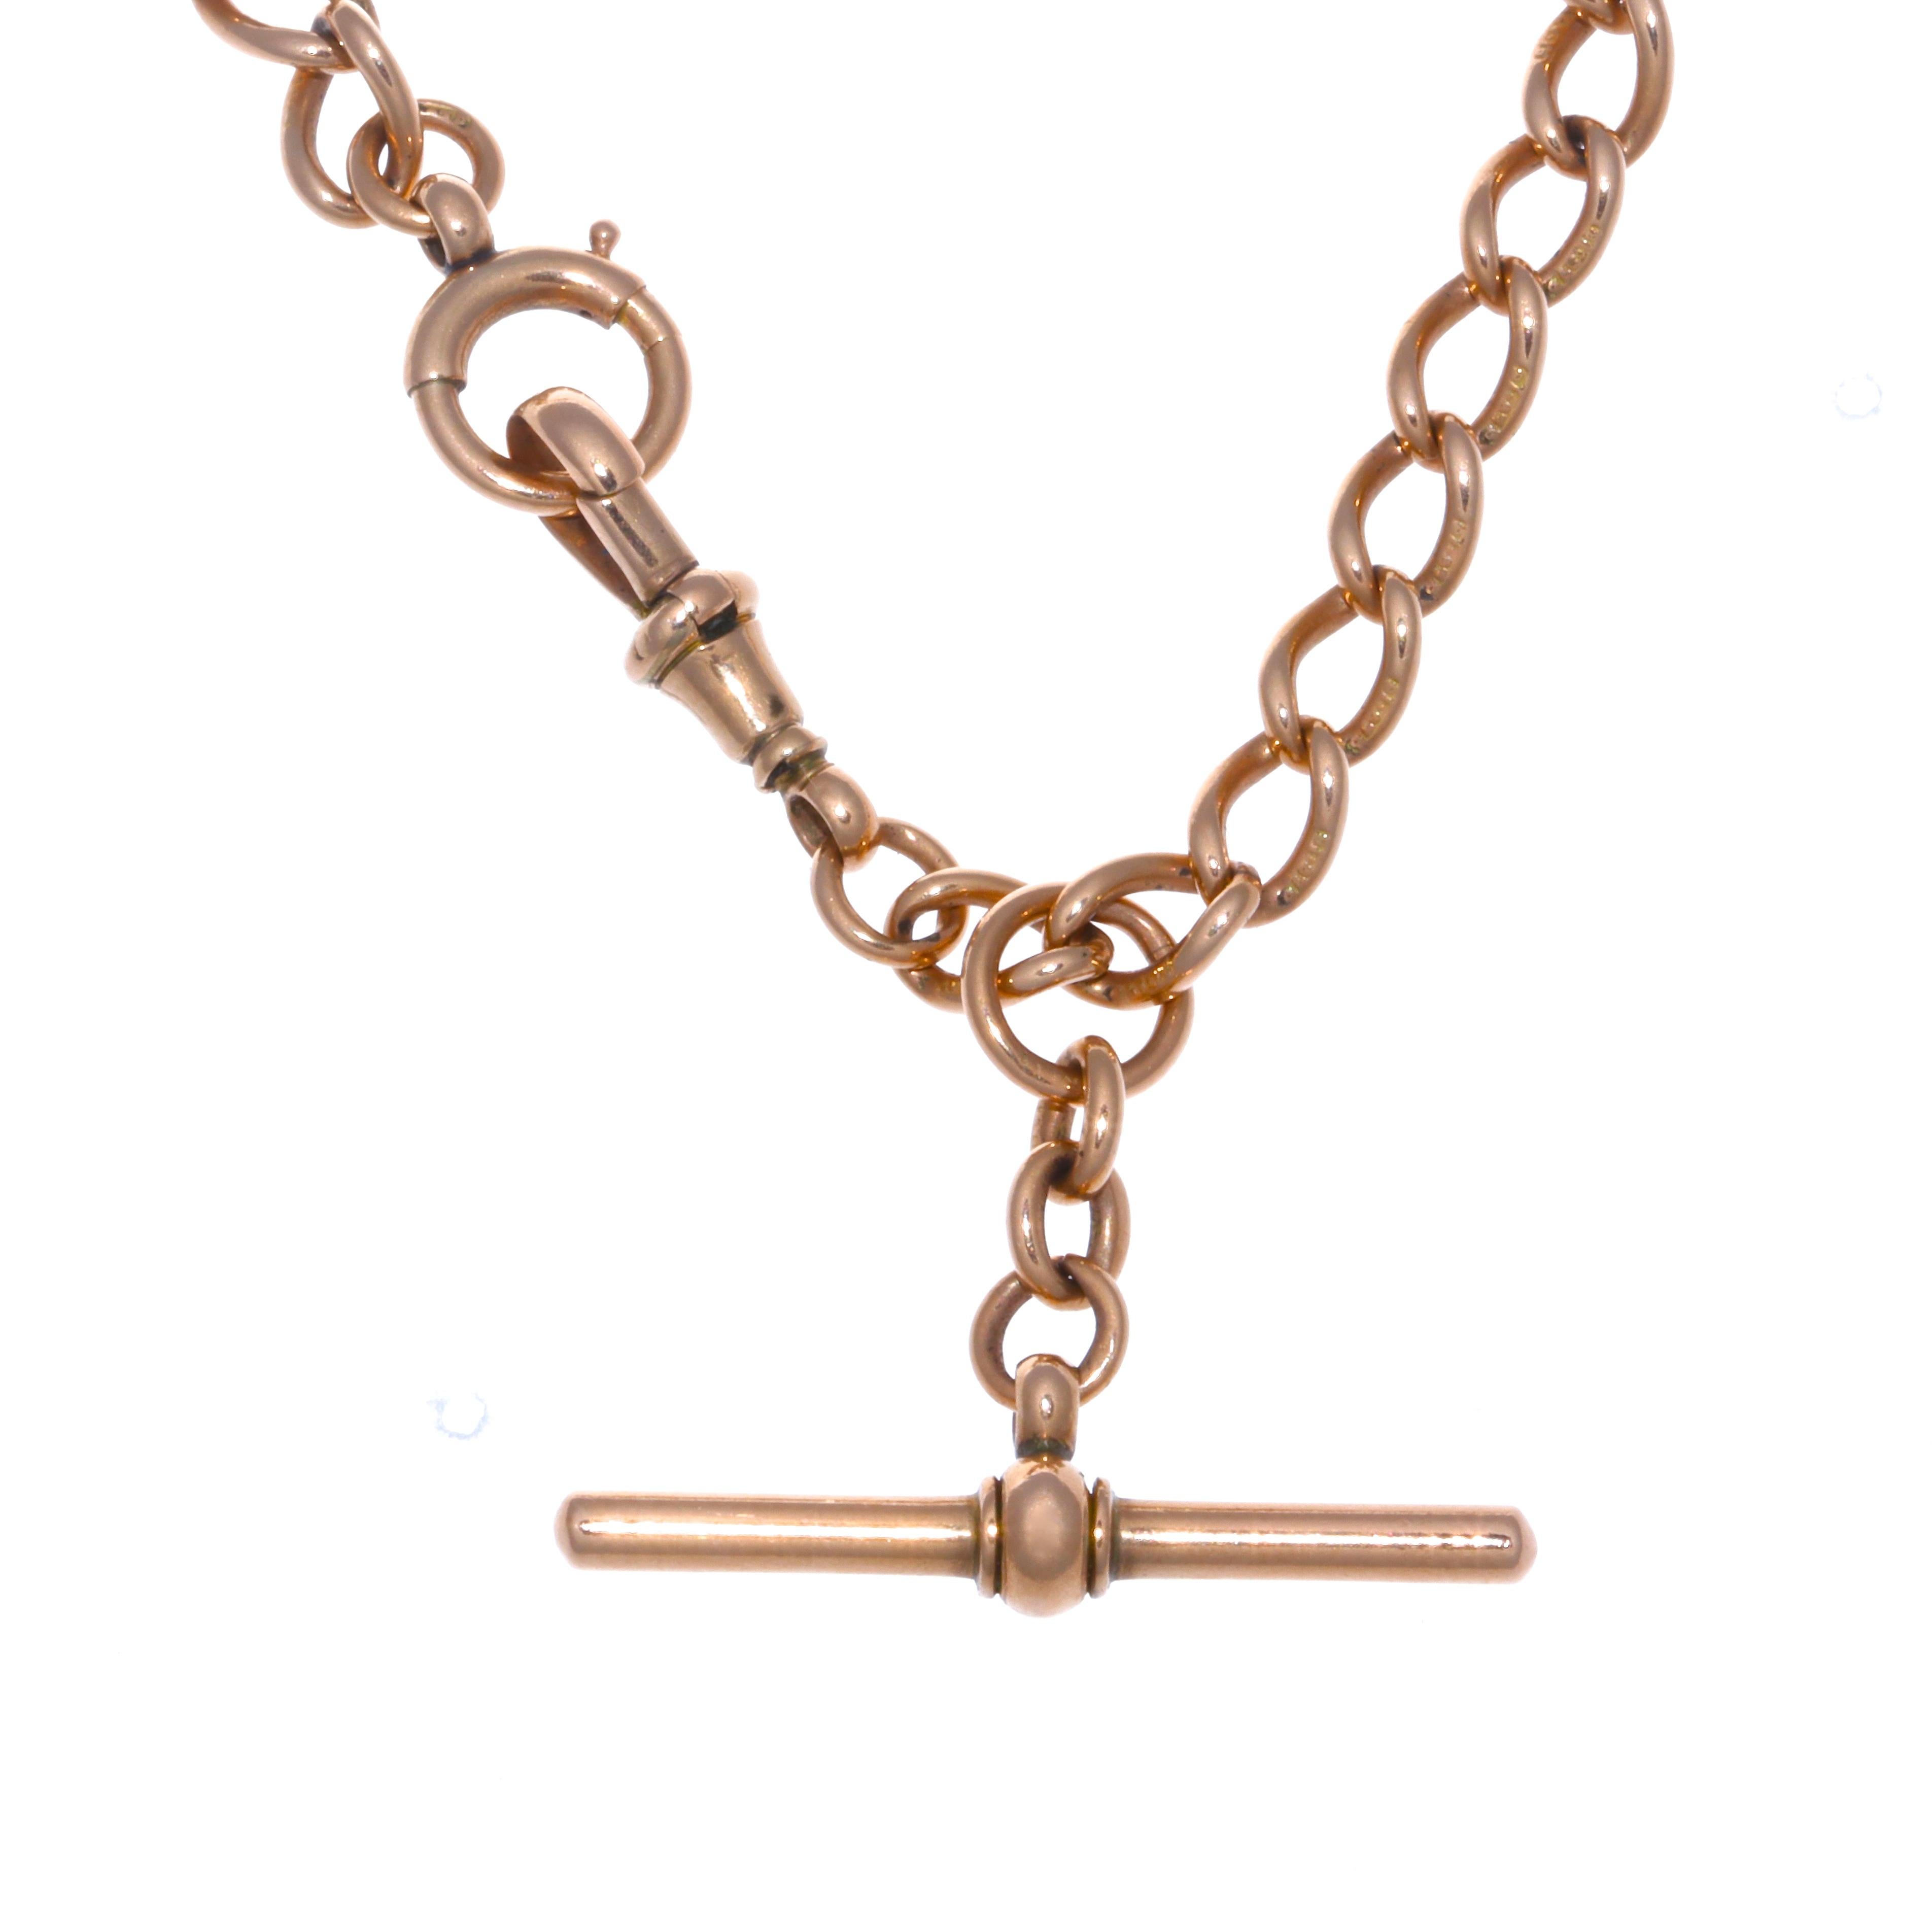 What a cool item. Originally created as a watch chain, this versatile gold chain can be worn as a choker or a wrap bracelet. The chain is a historic piece from the late Victorian era. Featuring 9k gold, a ring clasp and a dog clip clasp. Hallmarked